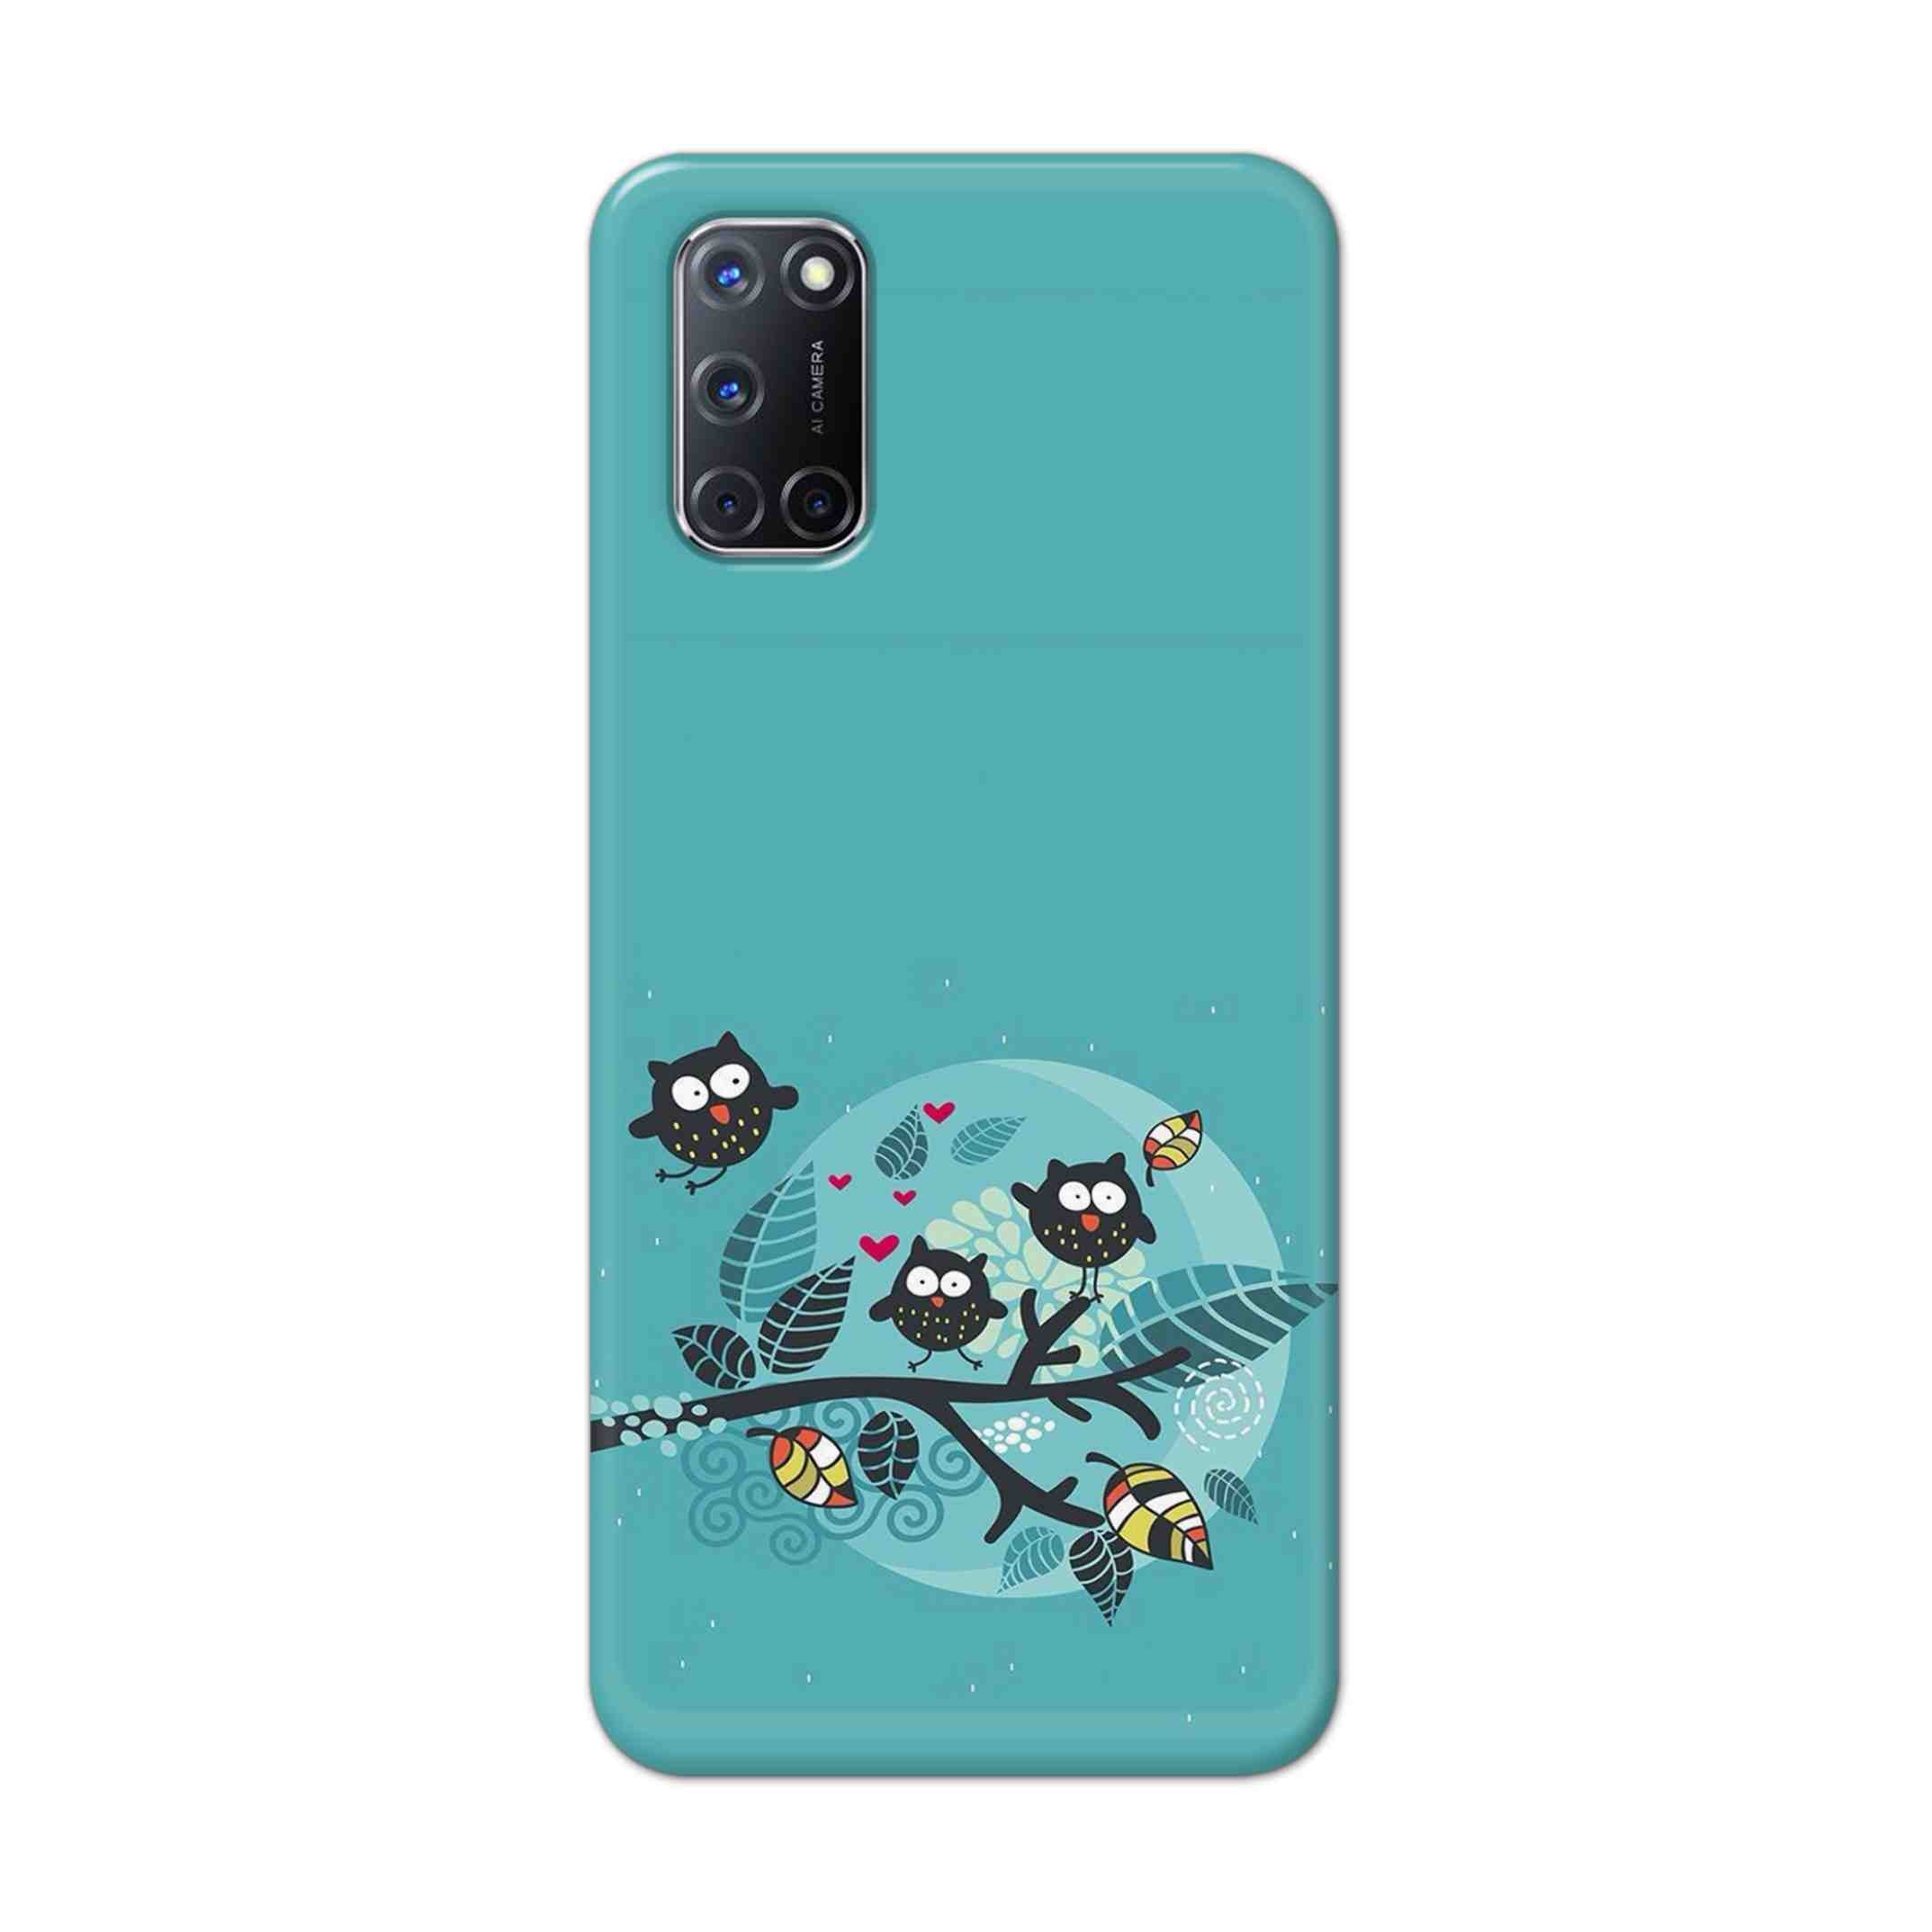 Buy Owl Hard Back Mobile Phone Case Cover For Oppo A52 Online